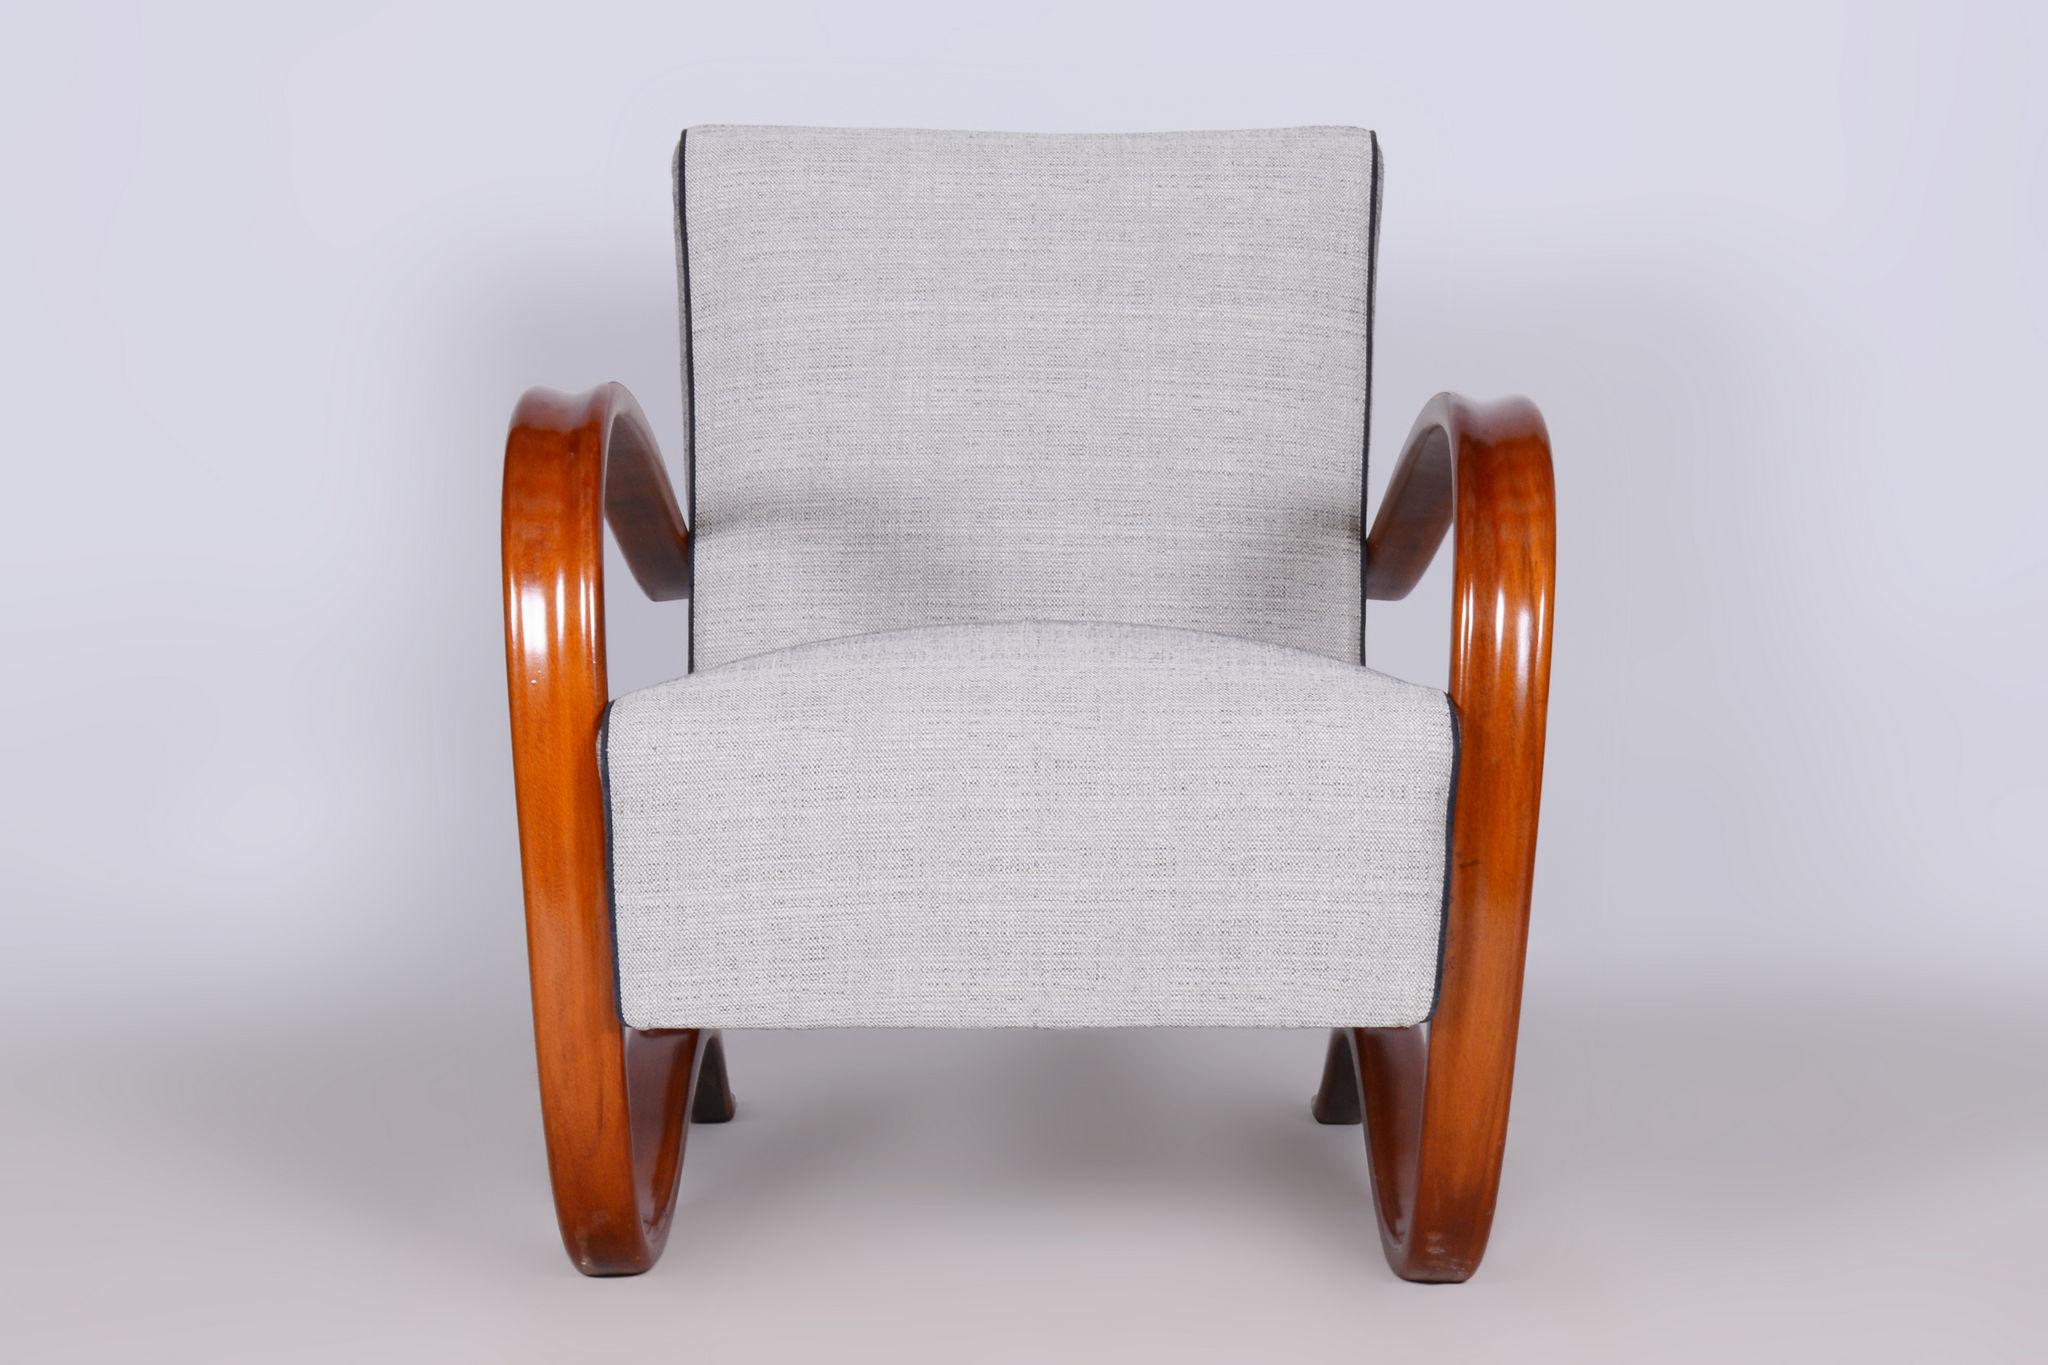 Fabric Pair of Restored H-269 Armchairs, by Jindrich Halabala, UP Zavody, Czech, 1930s For Sale